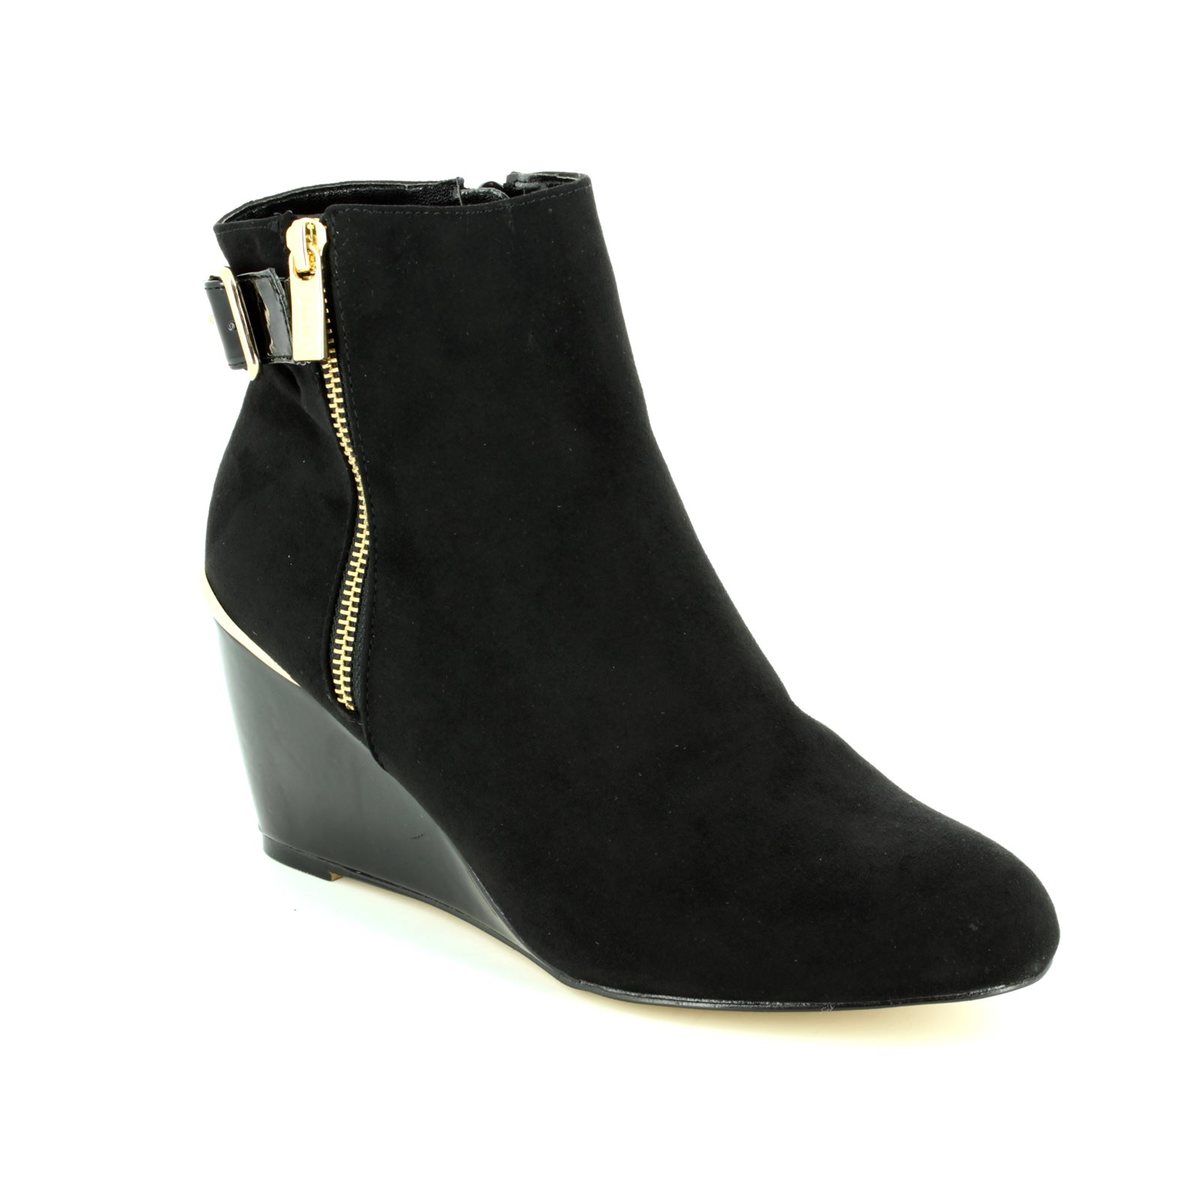 lotus wedge ankle boots